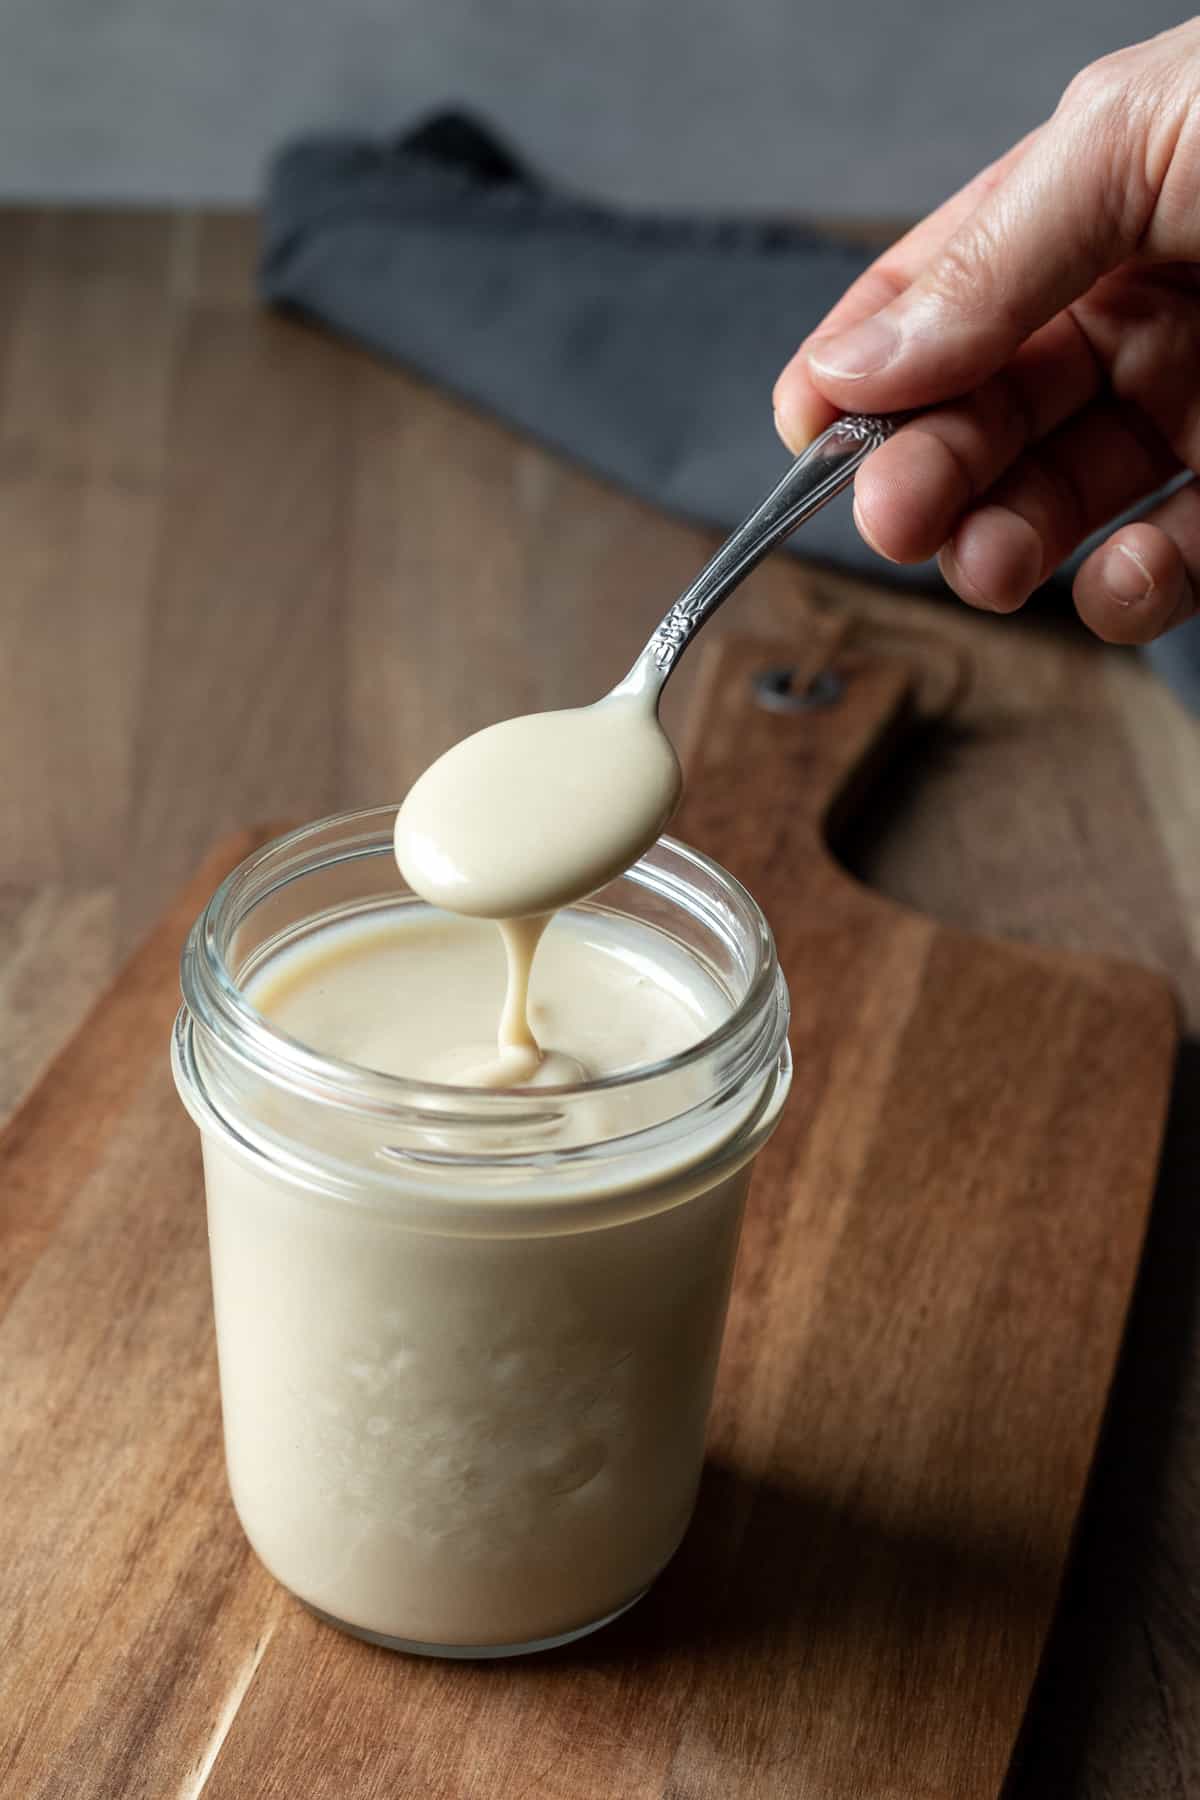 hand spooning up very thick and creamy dairy-free condensed milk from a jar.